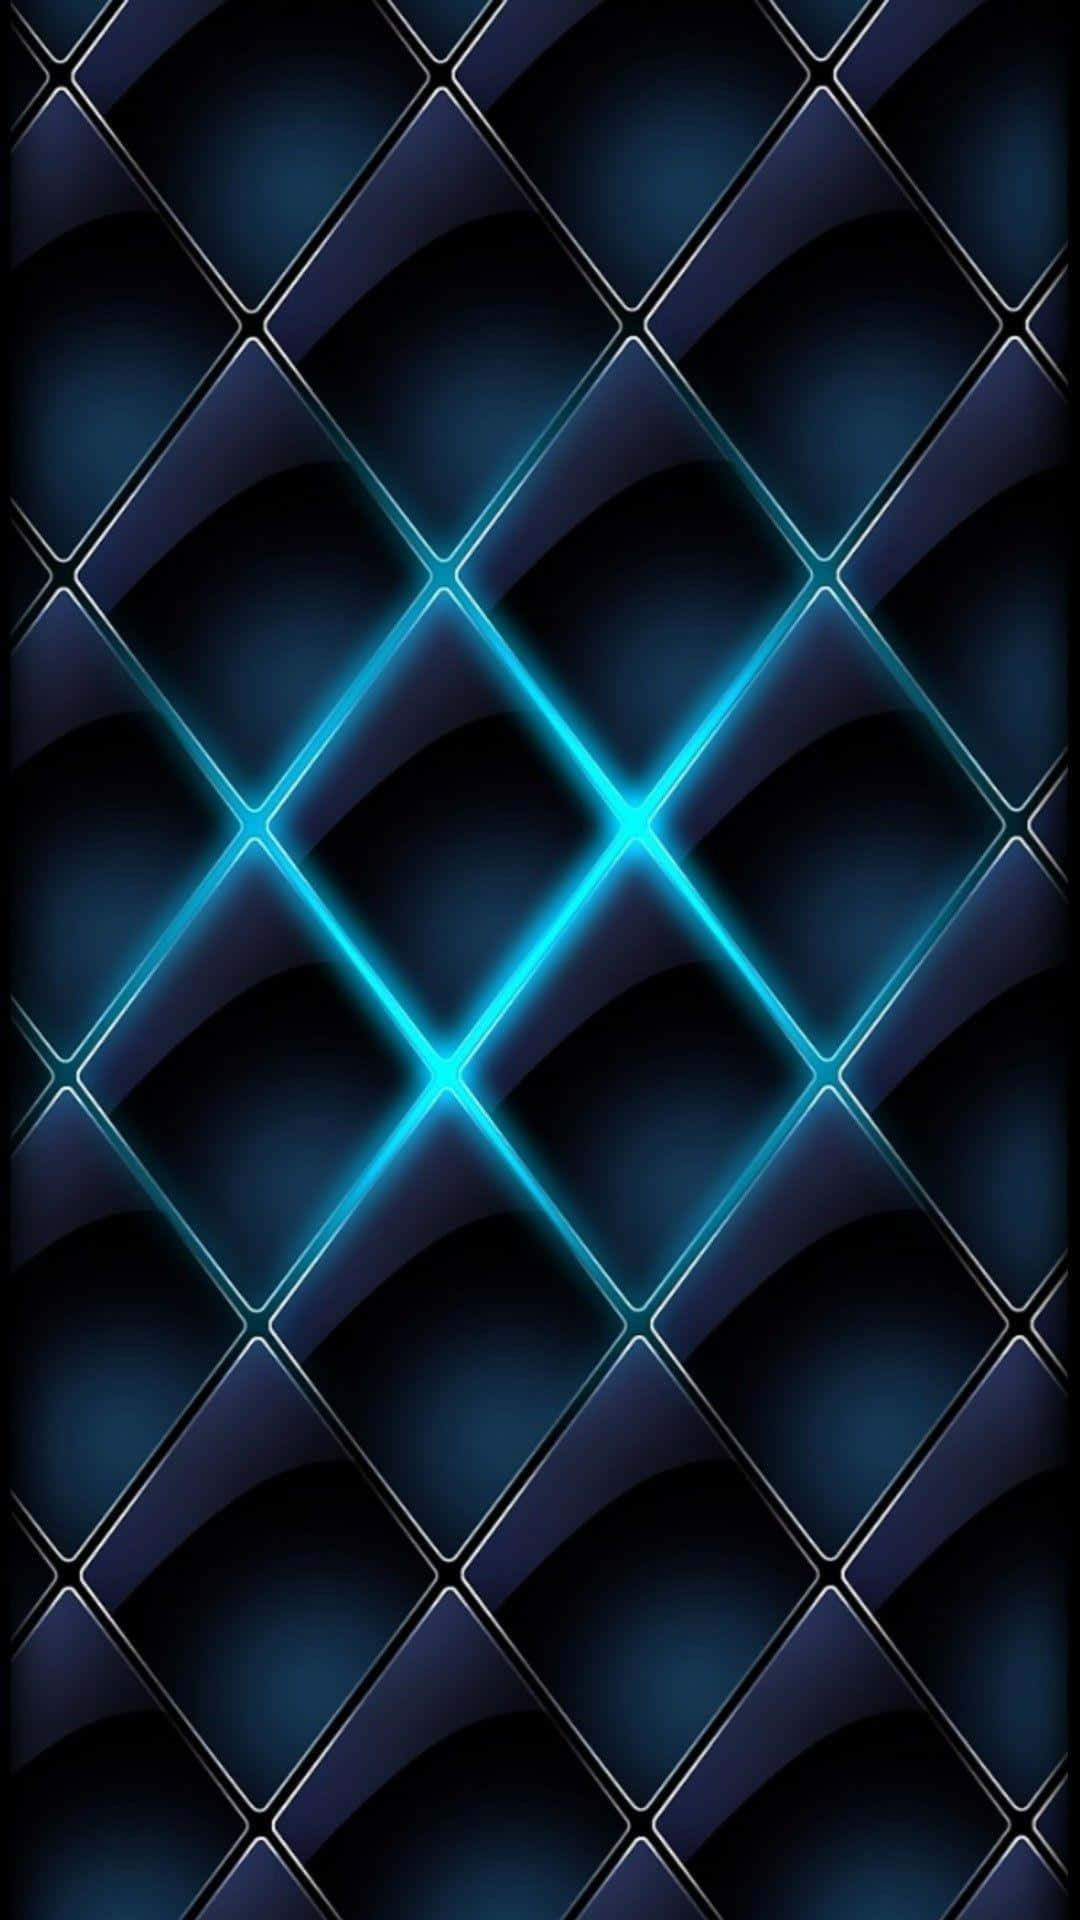 A Blue And White Tiled Background With A Glowing Light